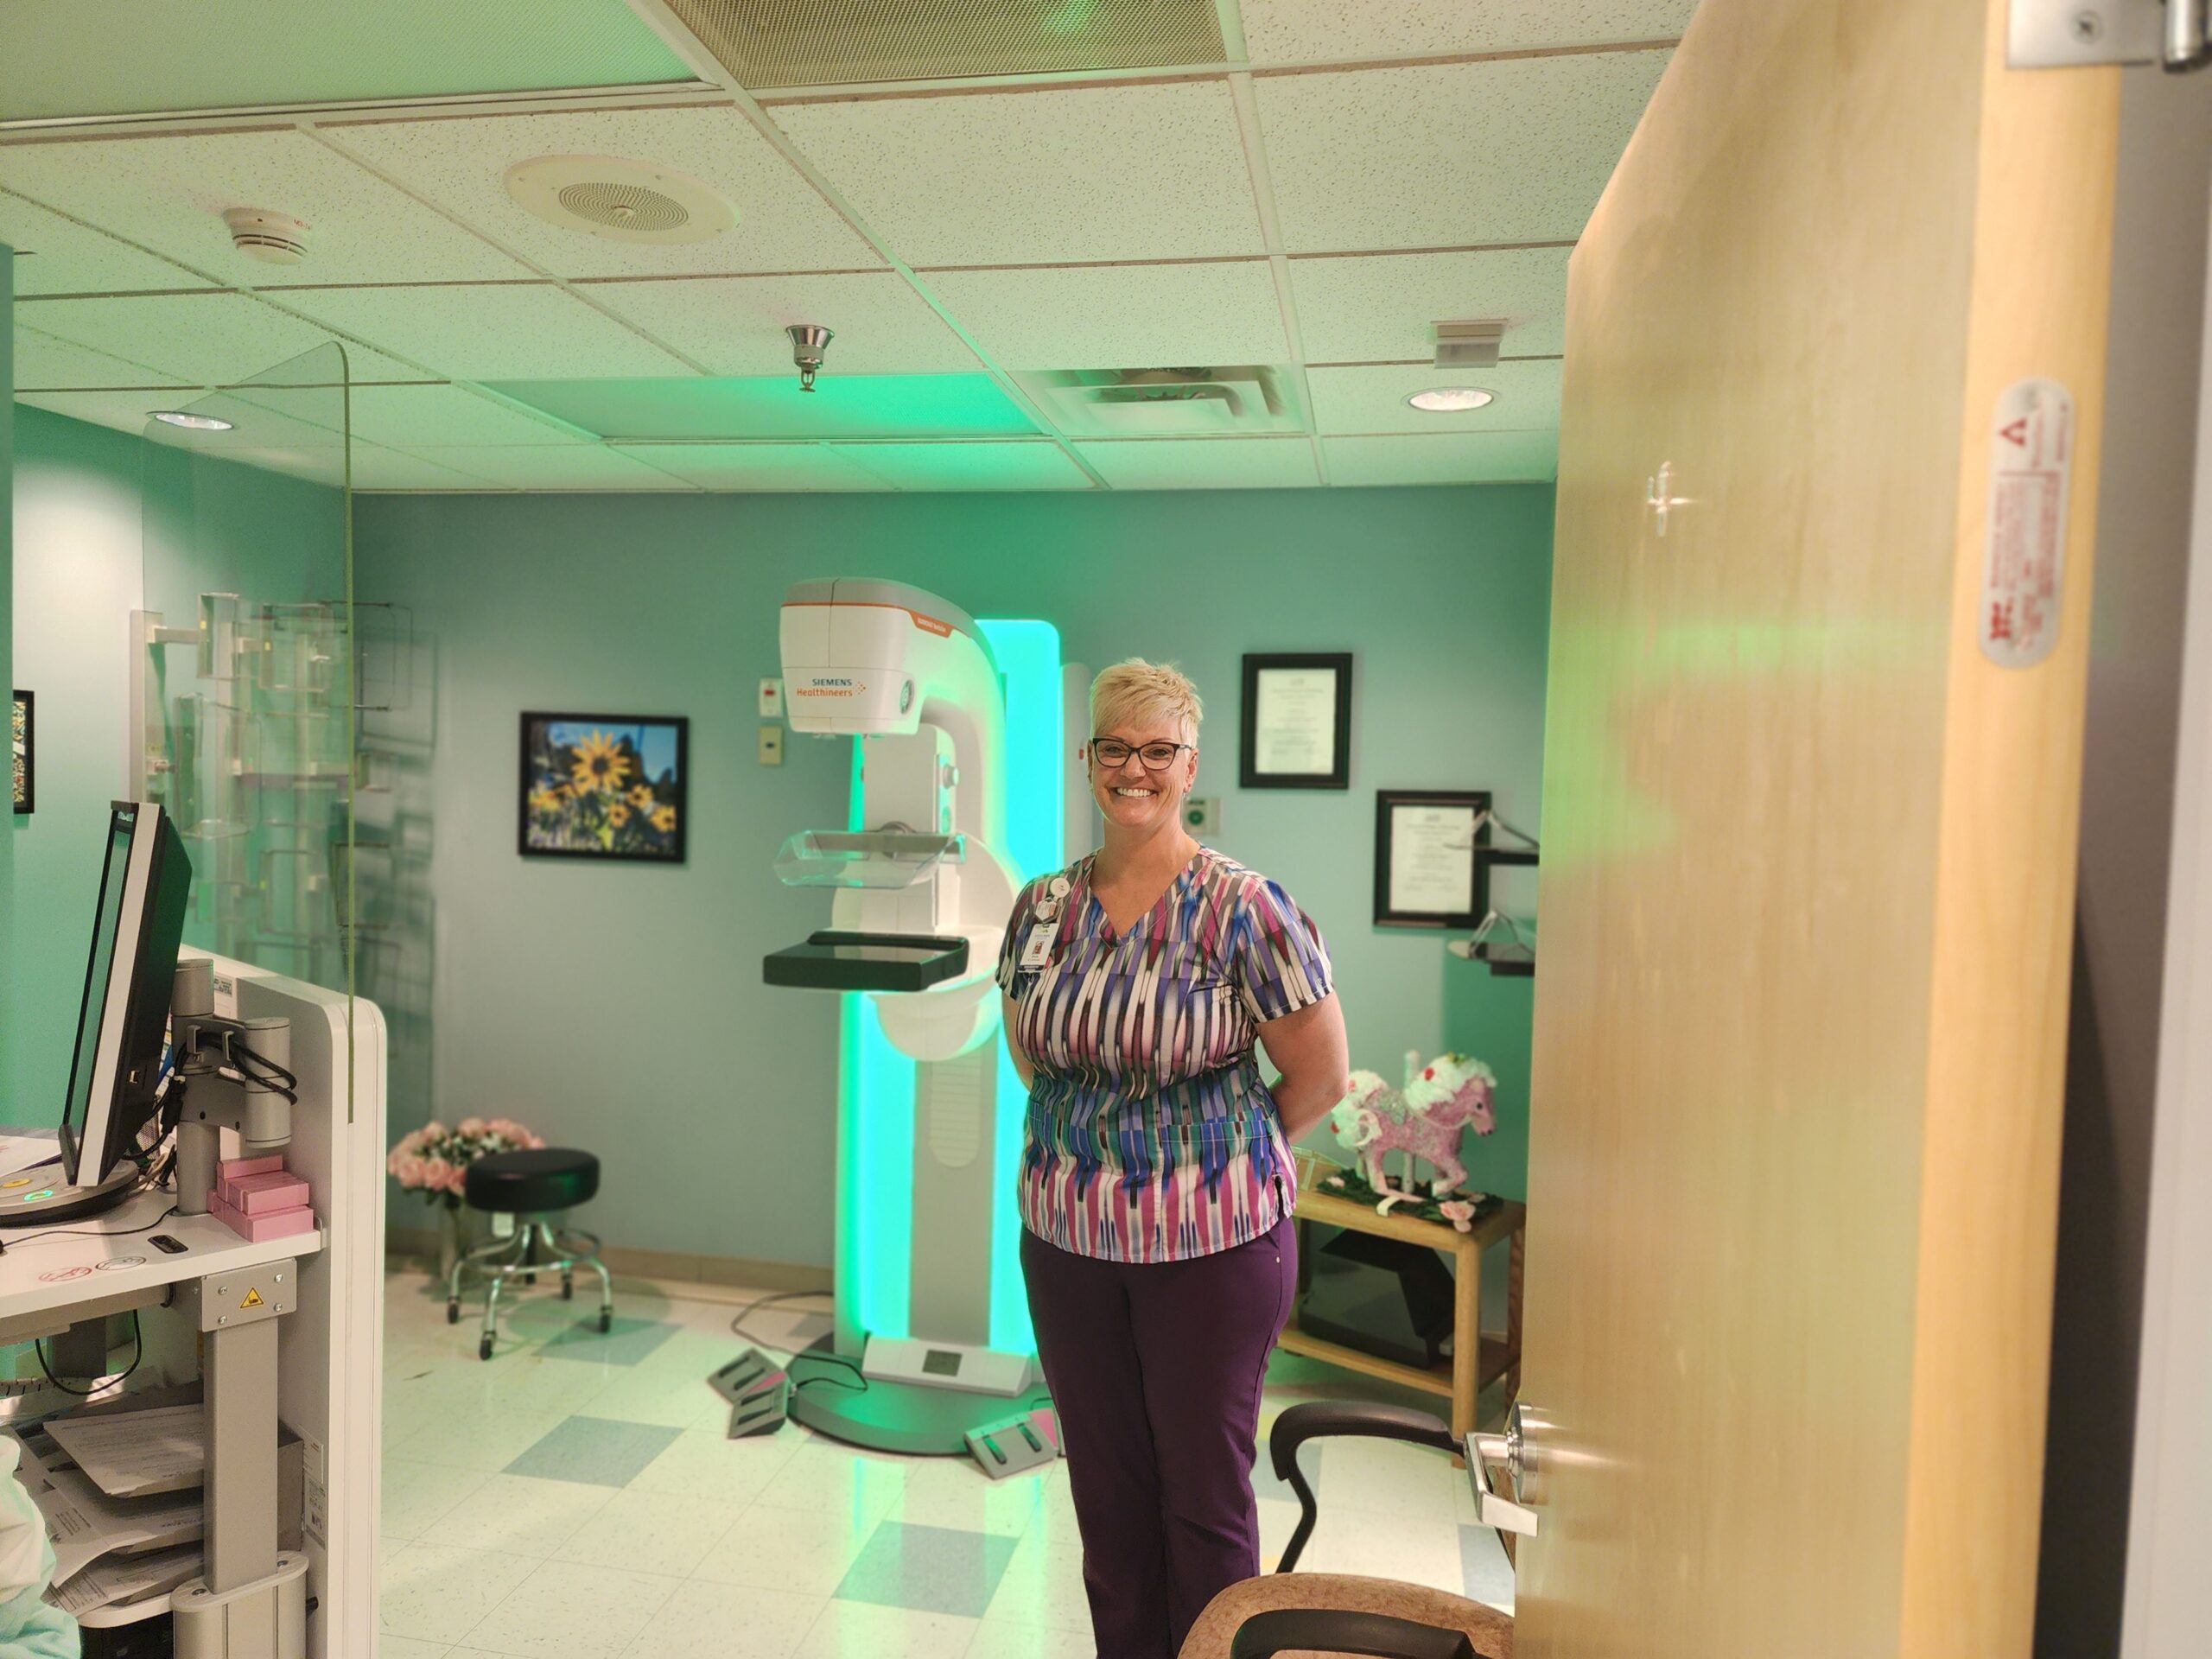 A woman wearing a colorful top and glasses stands in a room with medical equipment, including a mammography machine. She smiles, positioned next to a partially open door.